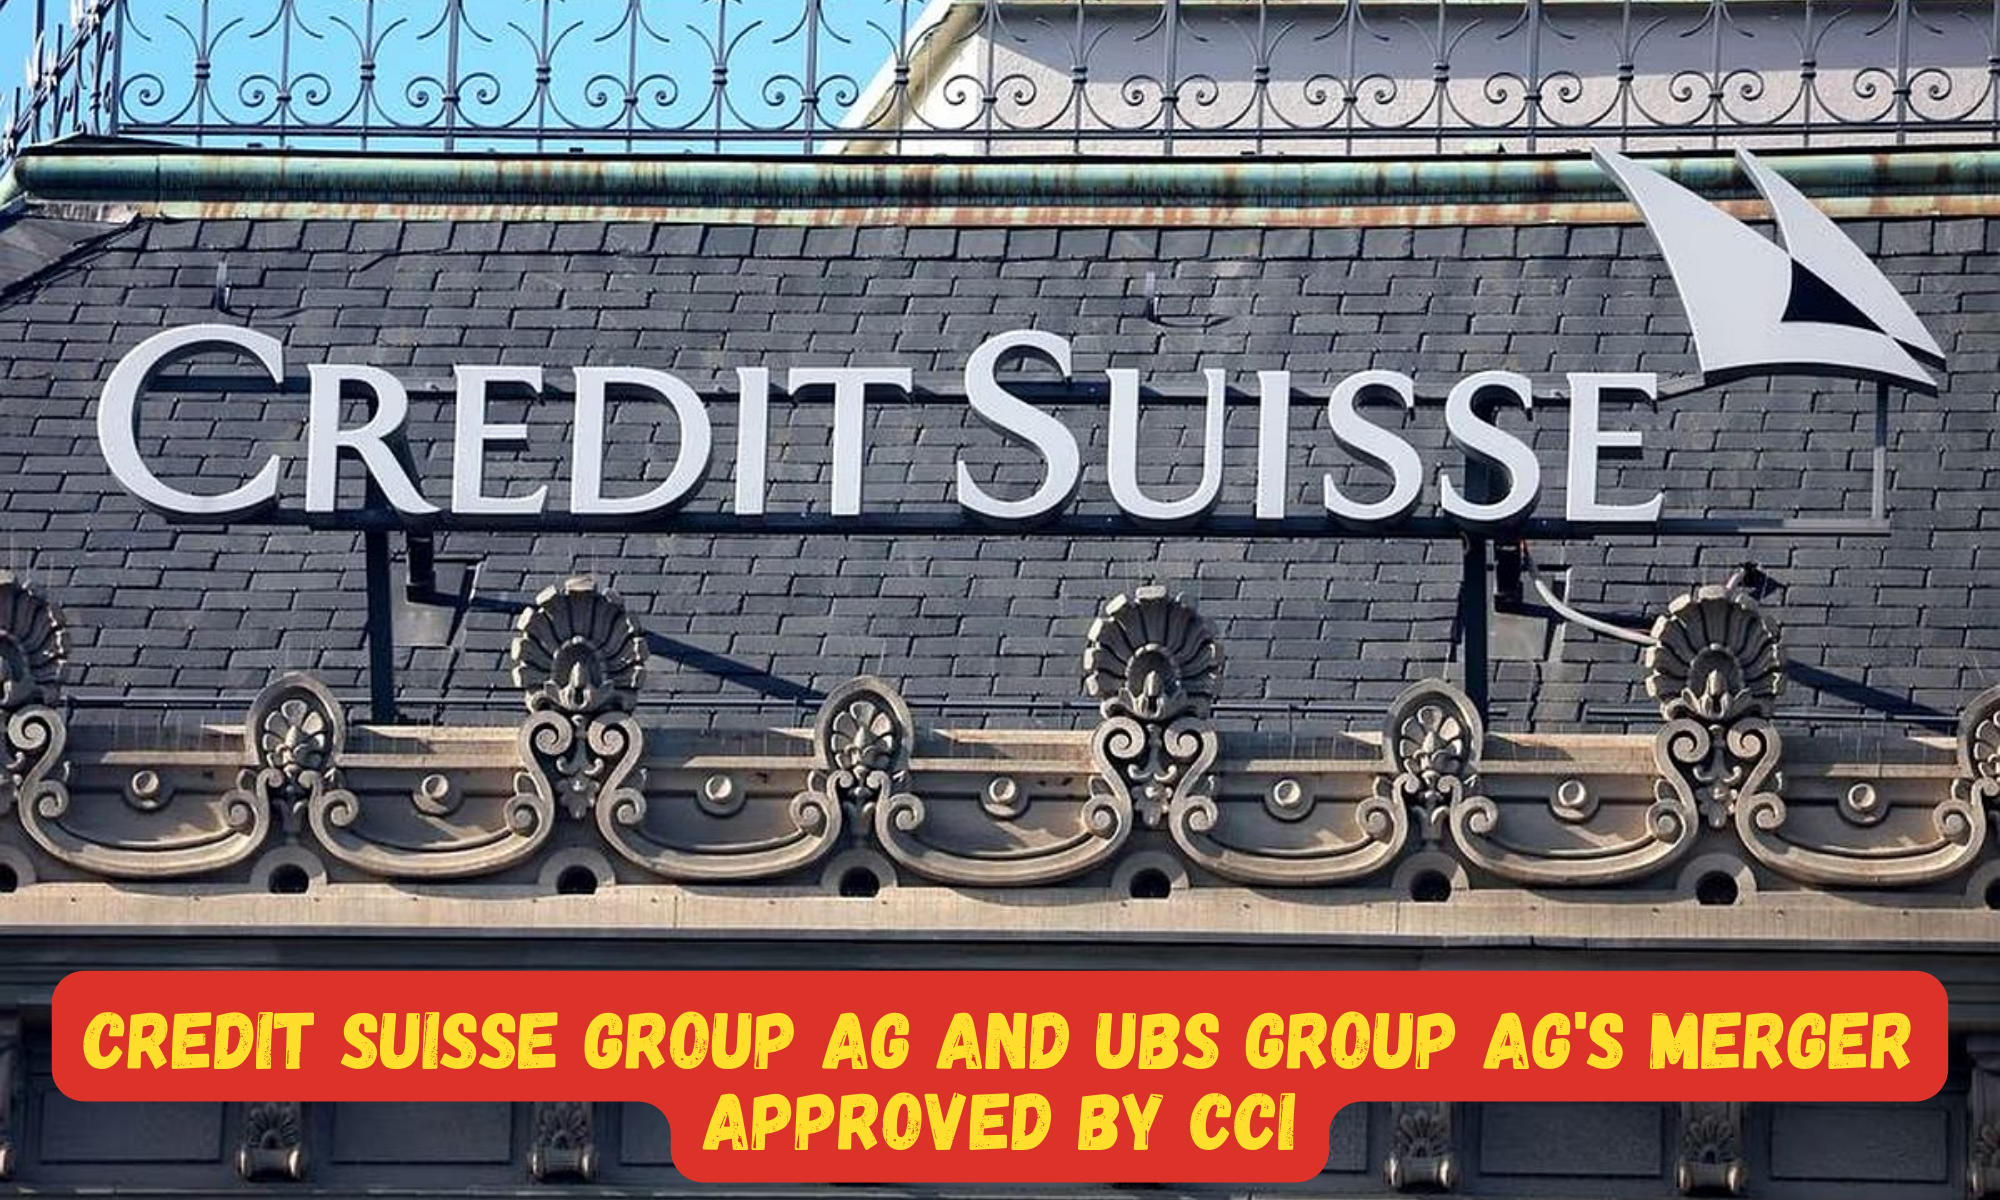 Credit Suisse Group AG and UBS Group AG's merger approved by CCI